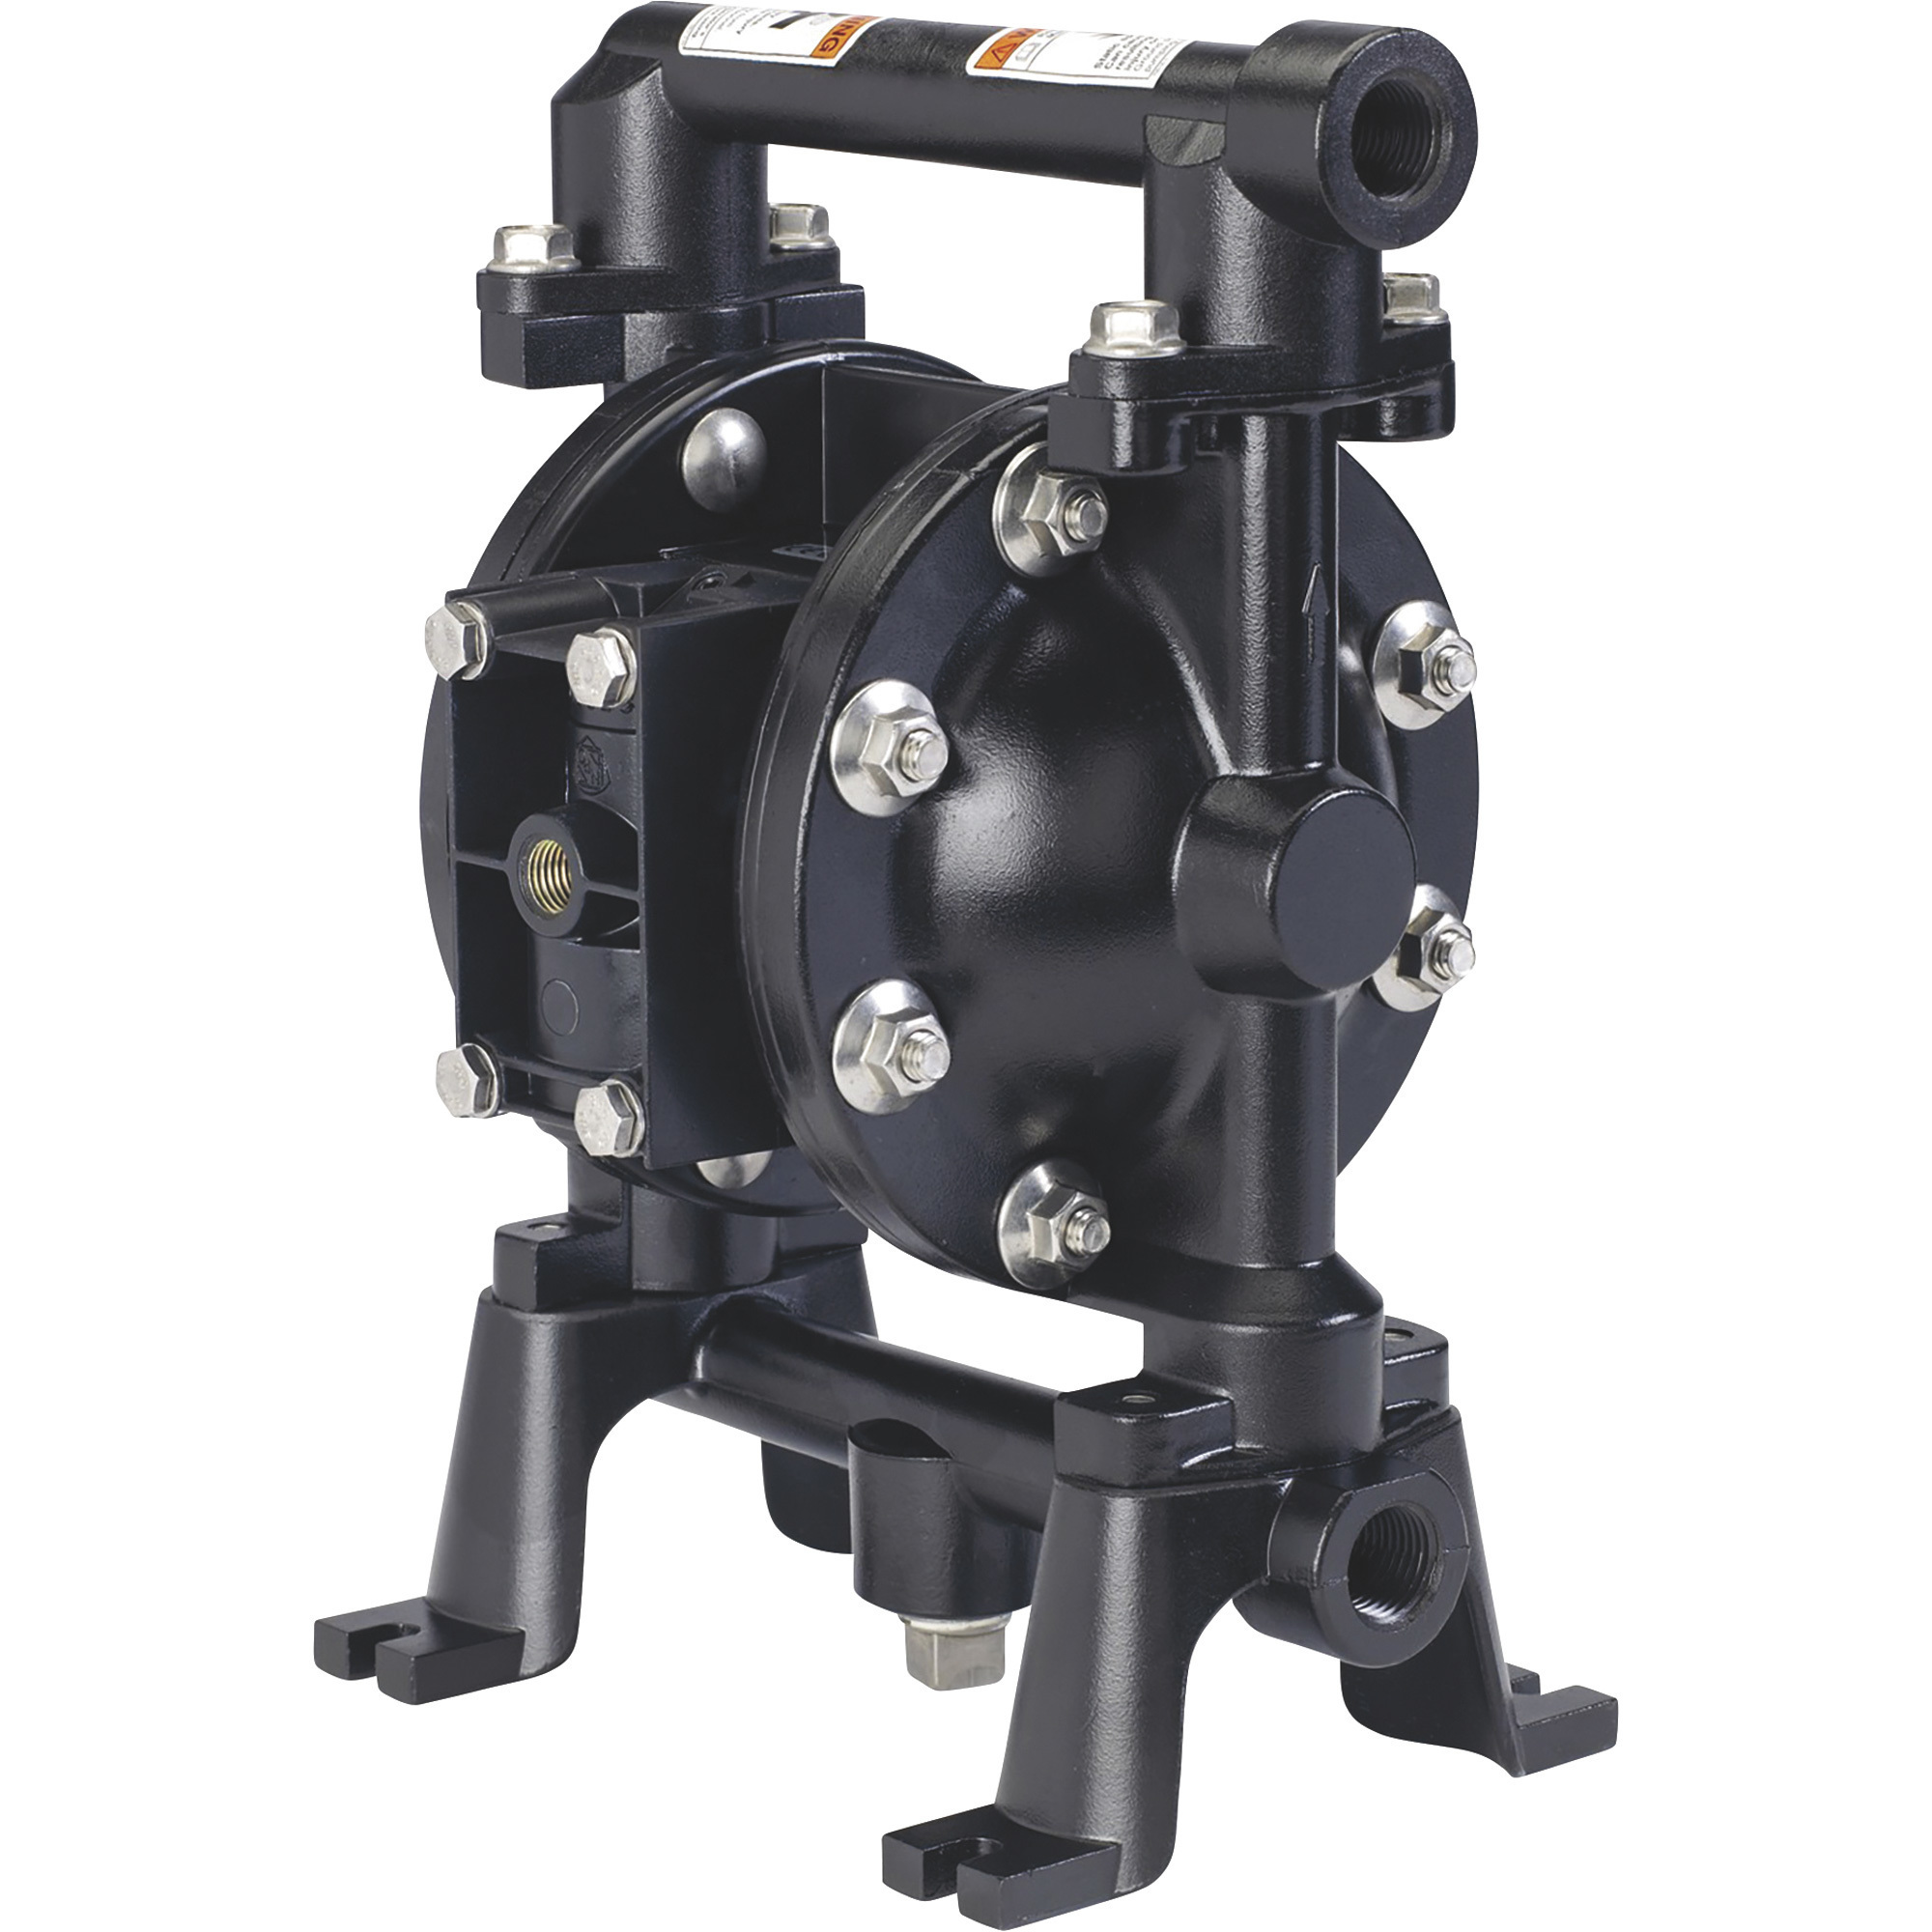 ARO Air-Operated Double Diaphragm Fuel Transfer Pump, 1/2Inch Ports, 12 GPM, Aluminum/Viton, Model 670042